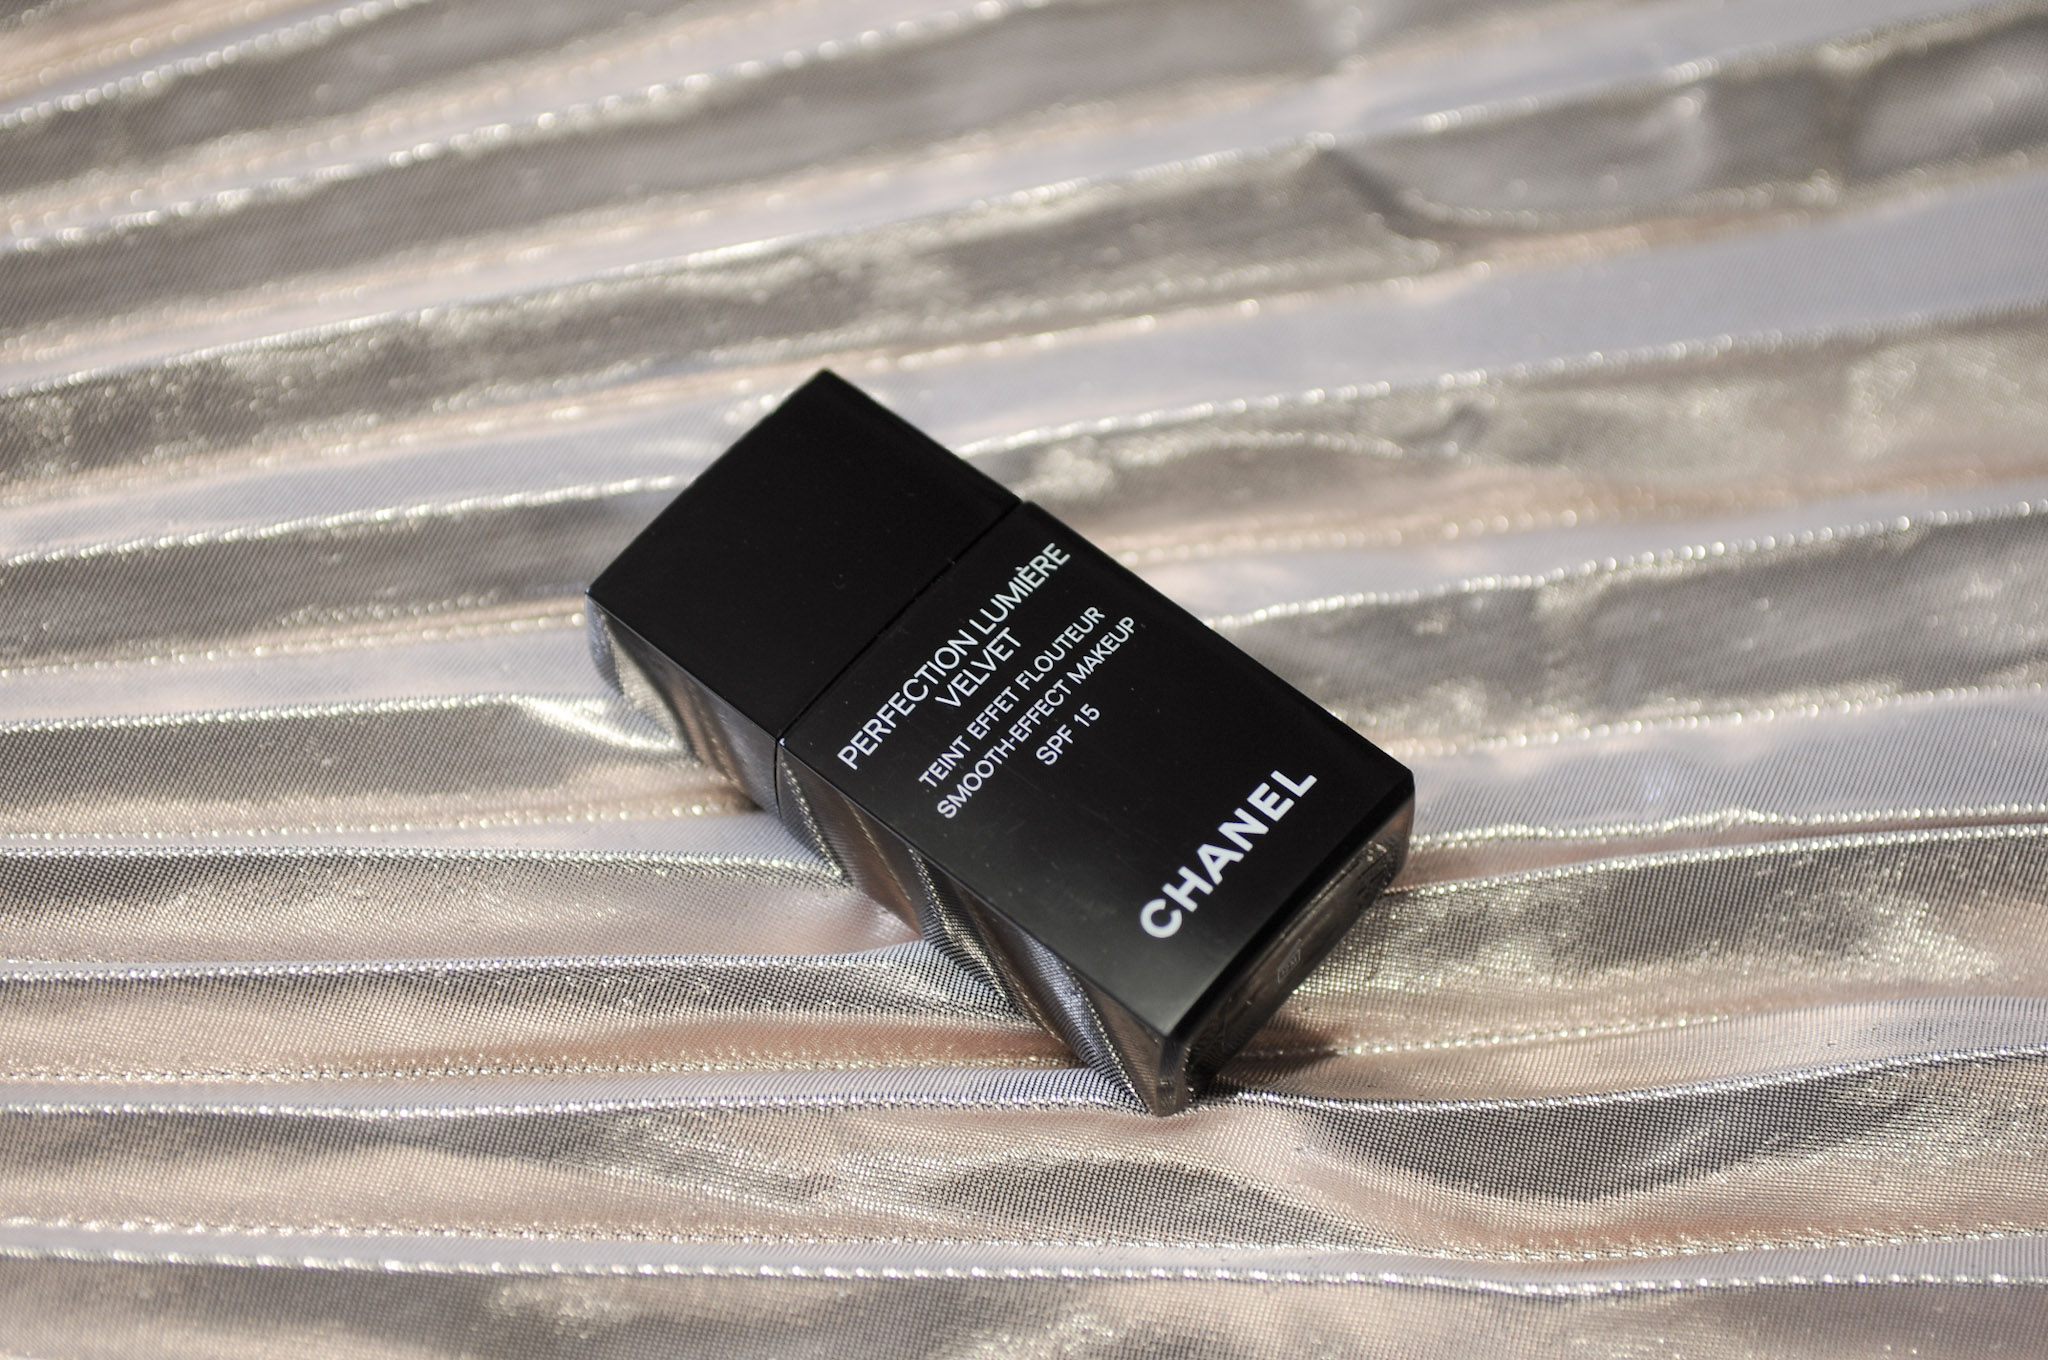 Chanel Perfection Lumiere Velvet Foundation Review - Ingrid Hughes Beauty